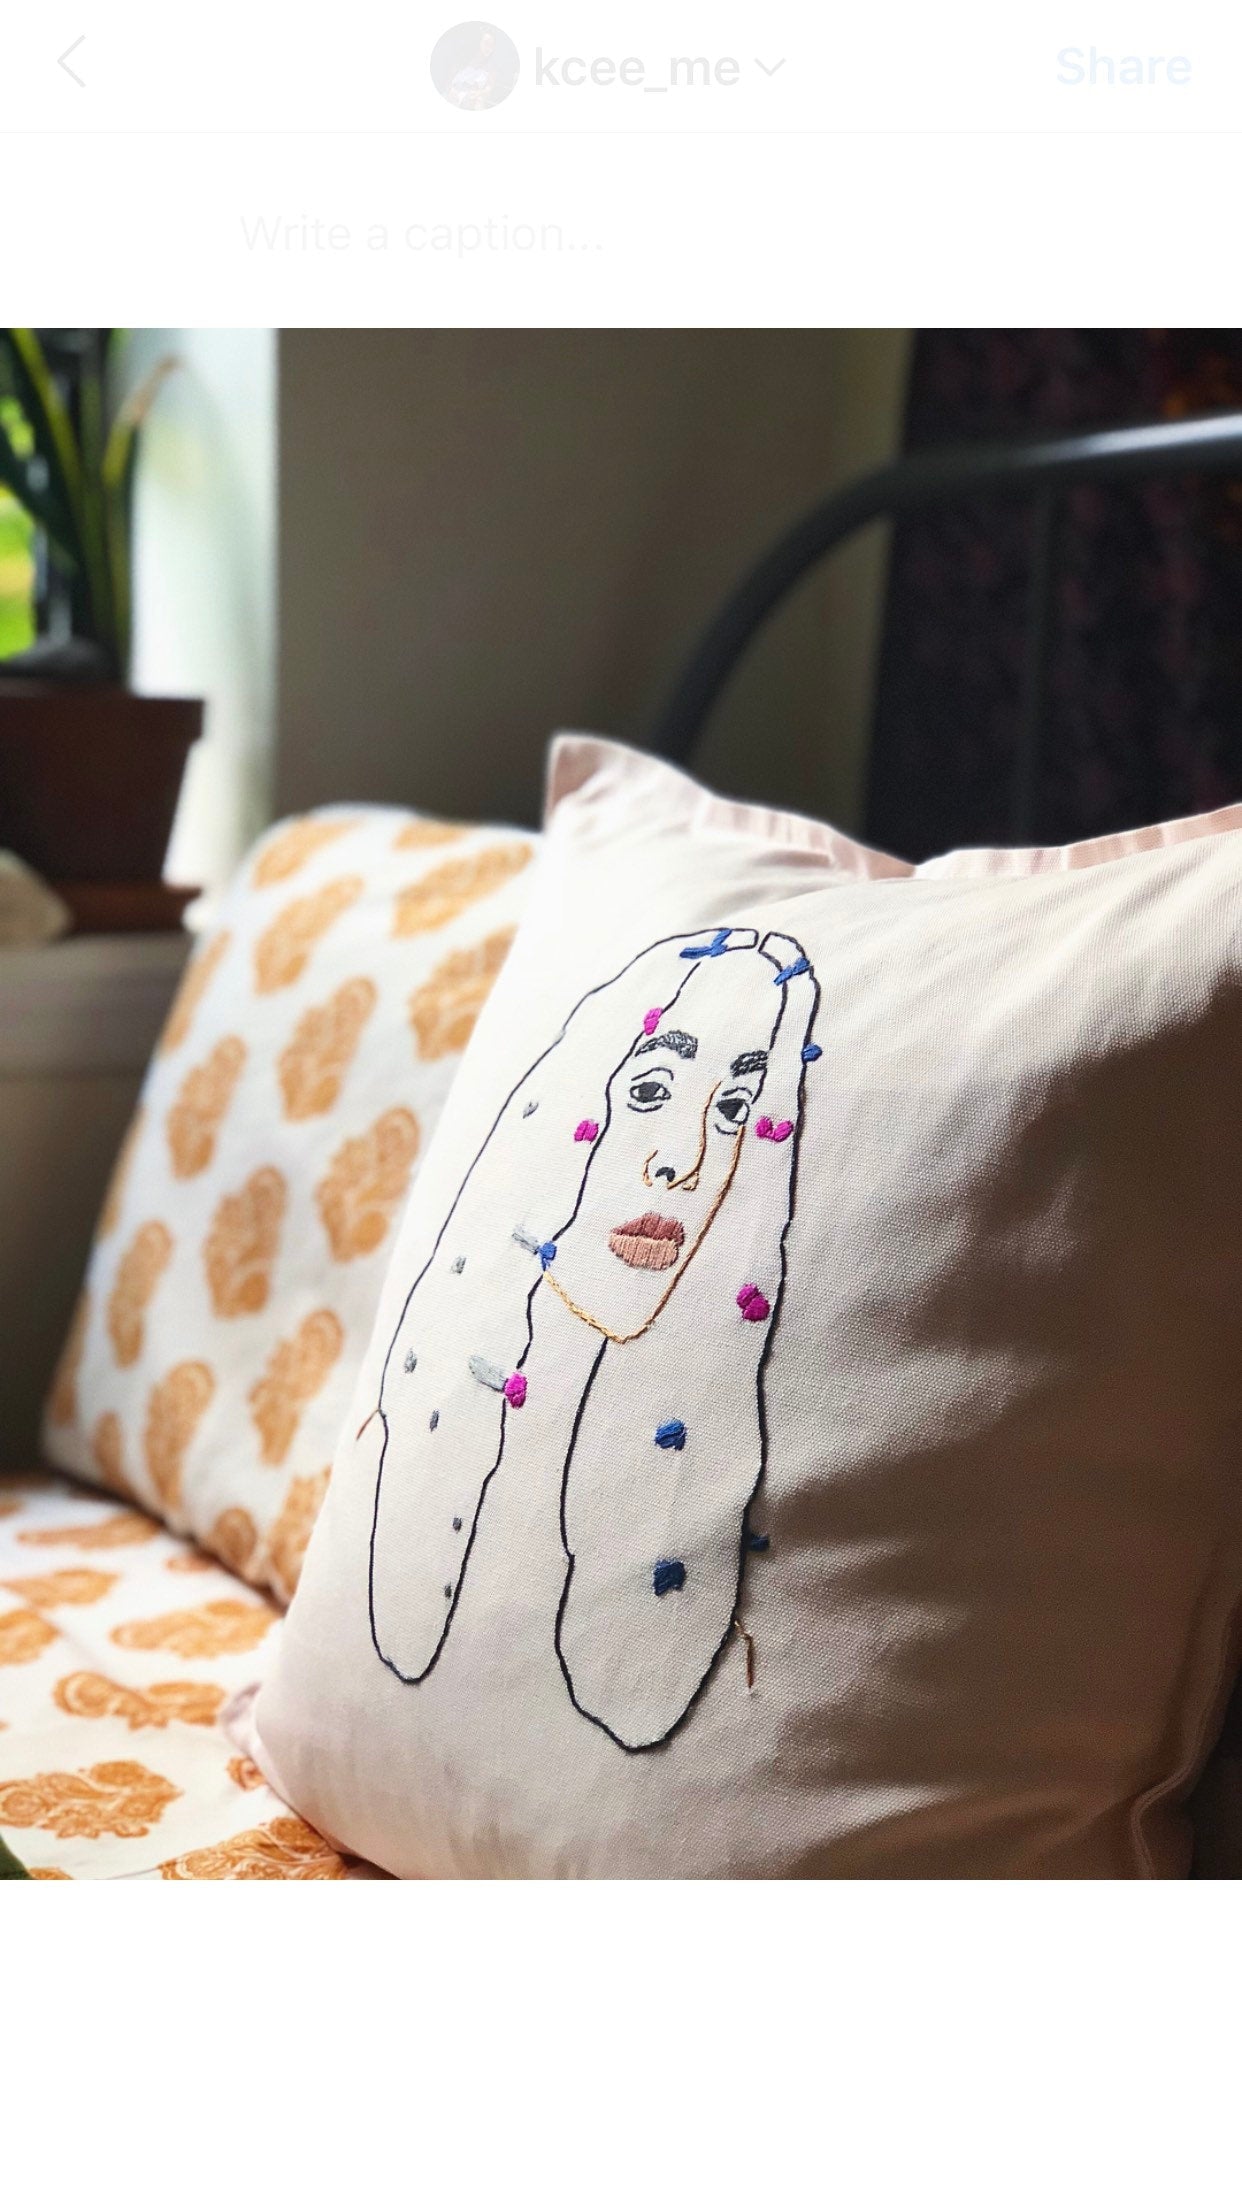 Solange, 20x20 Embroidered Pillow